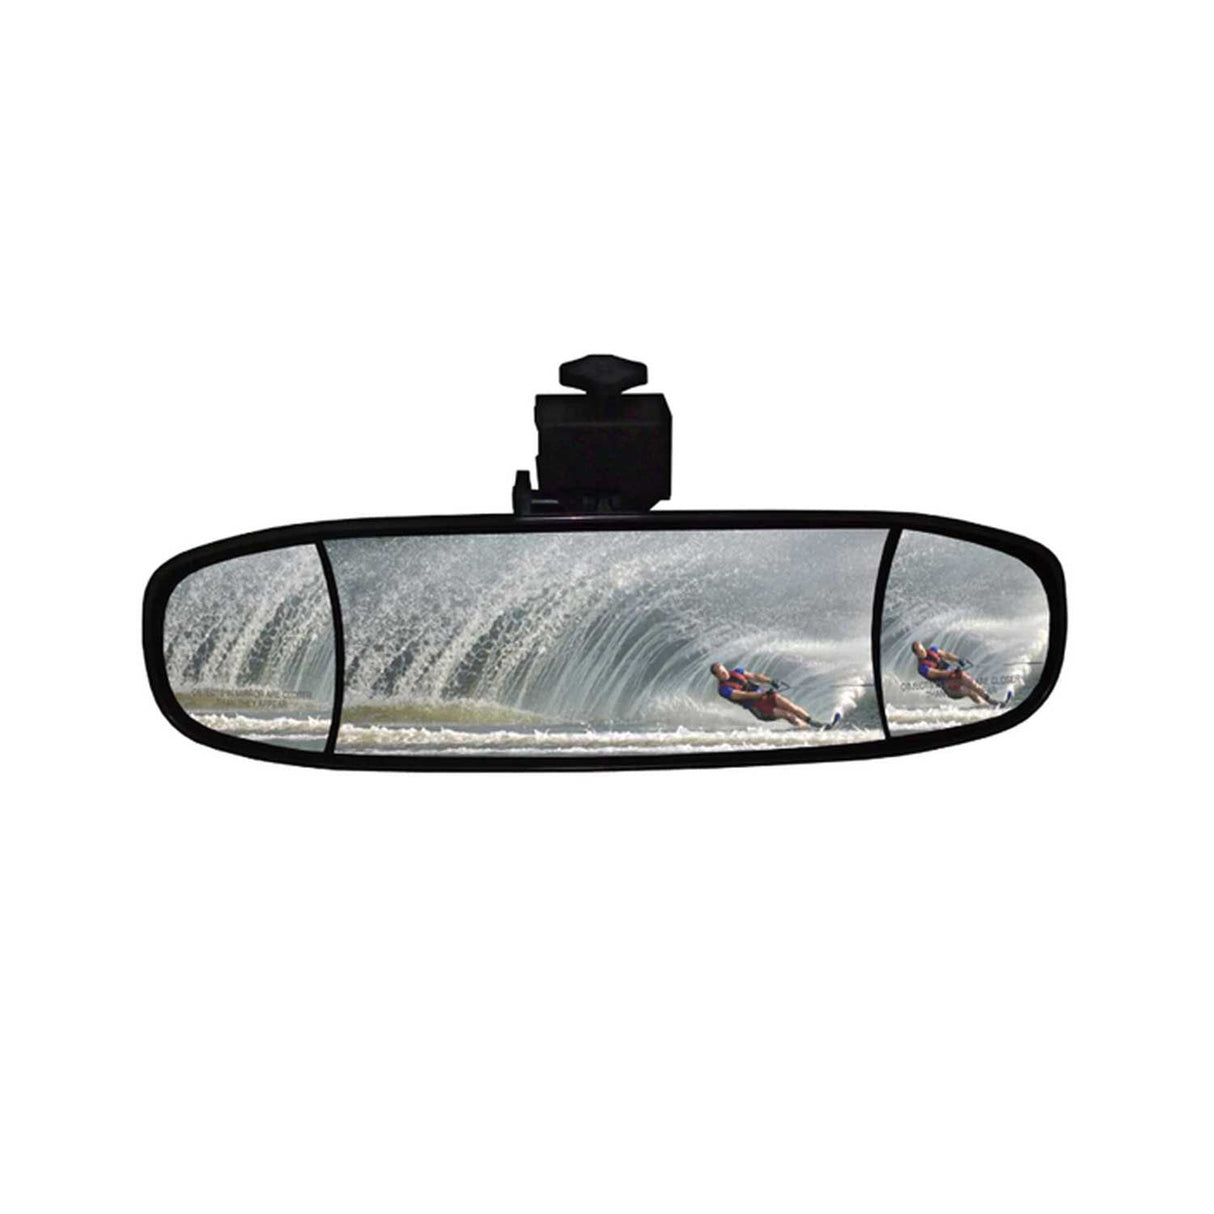 CIPA Extreme Boat Mirror Package